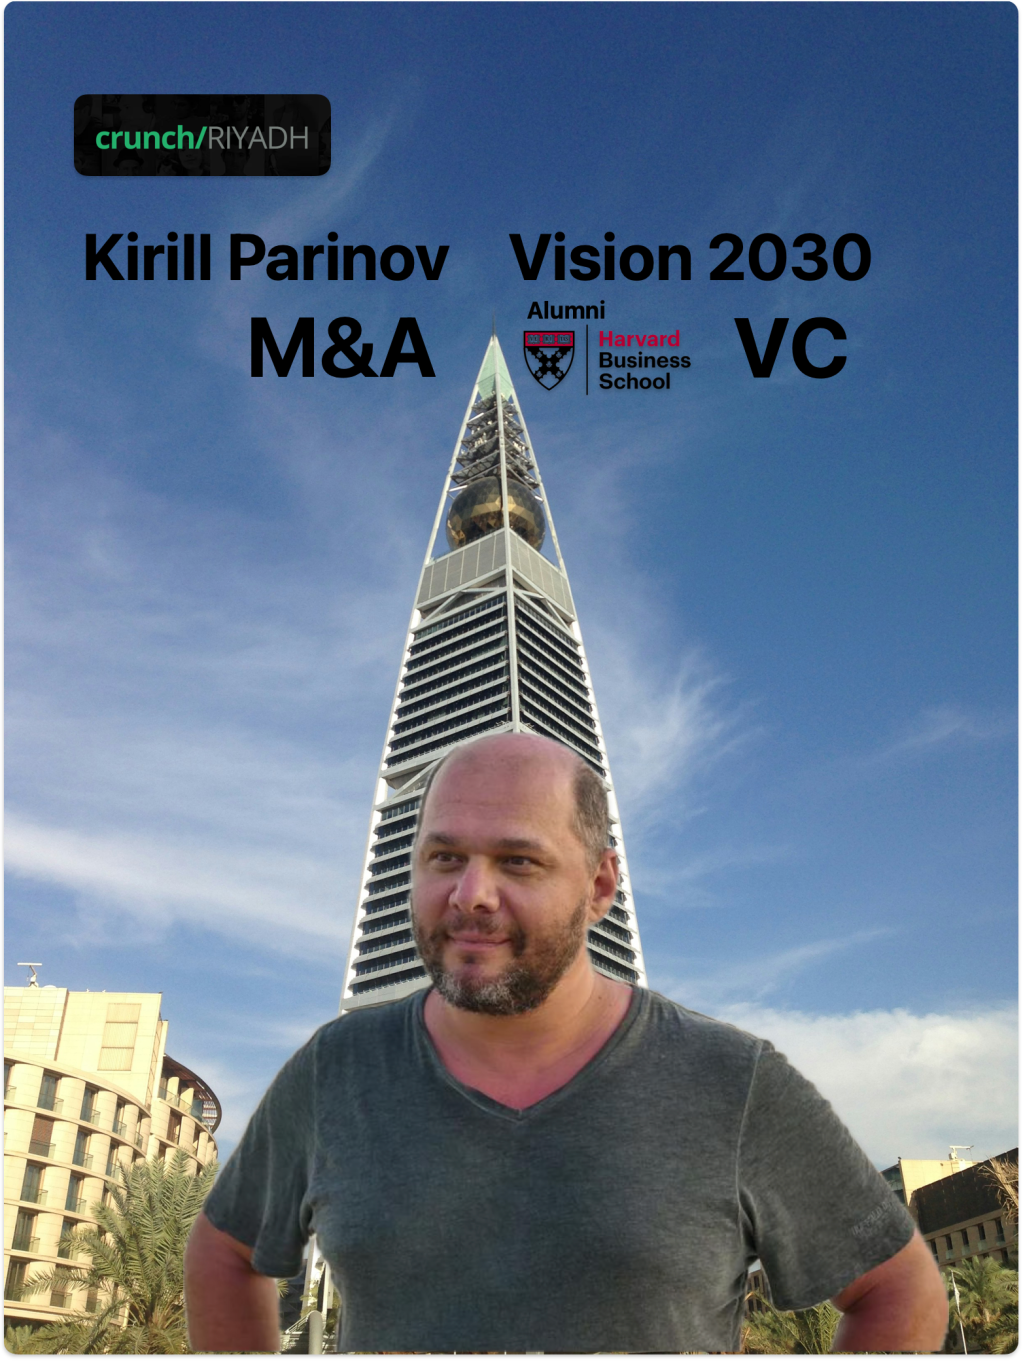 The Garage 2024. After Masayoshi Son founder &CEO SoftBank the time of Kirill Parinov Strategic Growth. We’ll be in Riyadh from February 17 to 25, 2024.